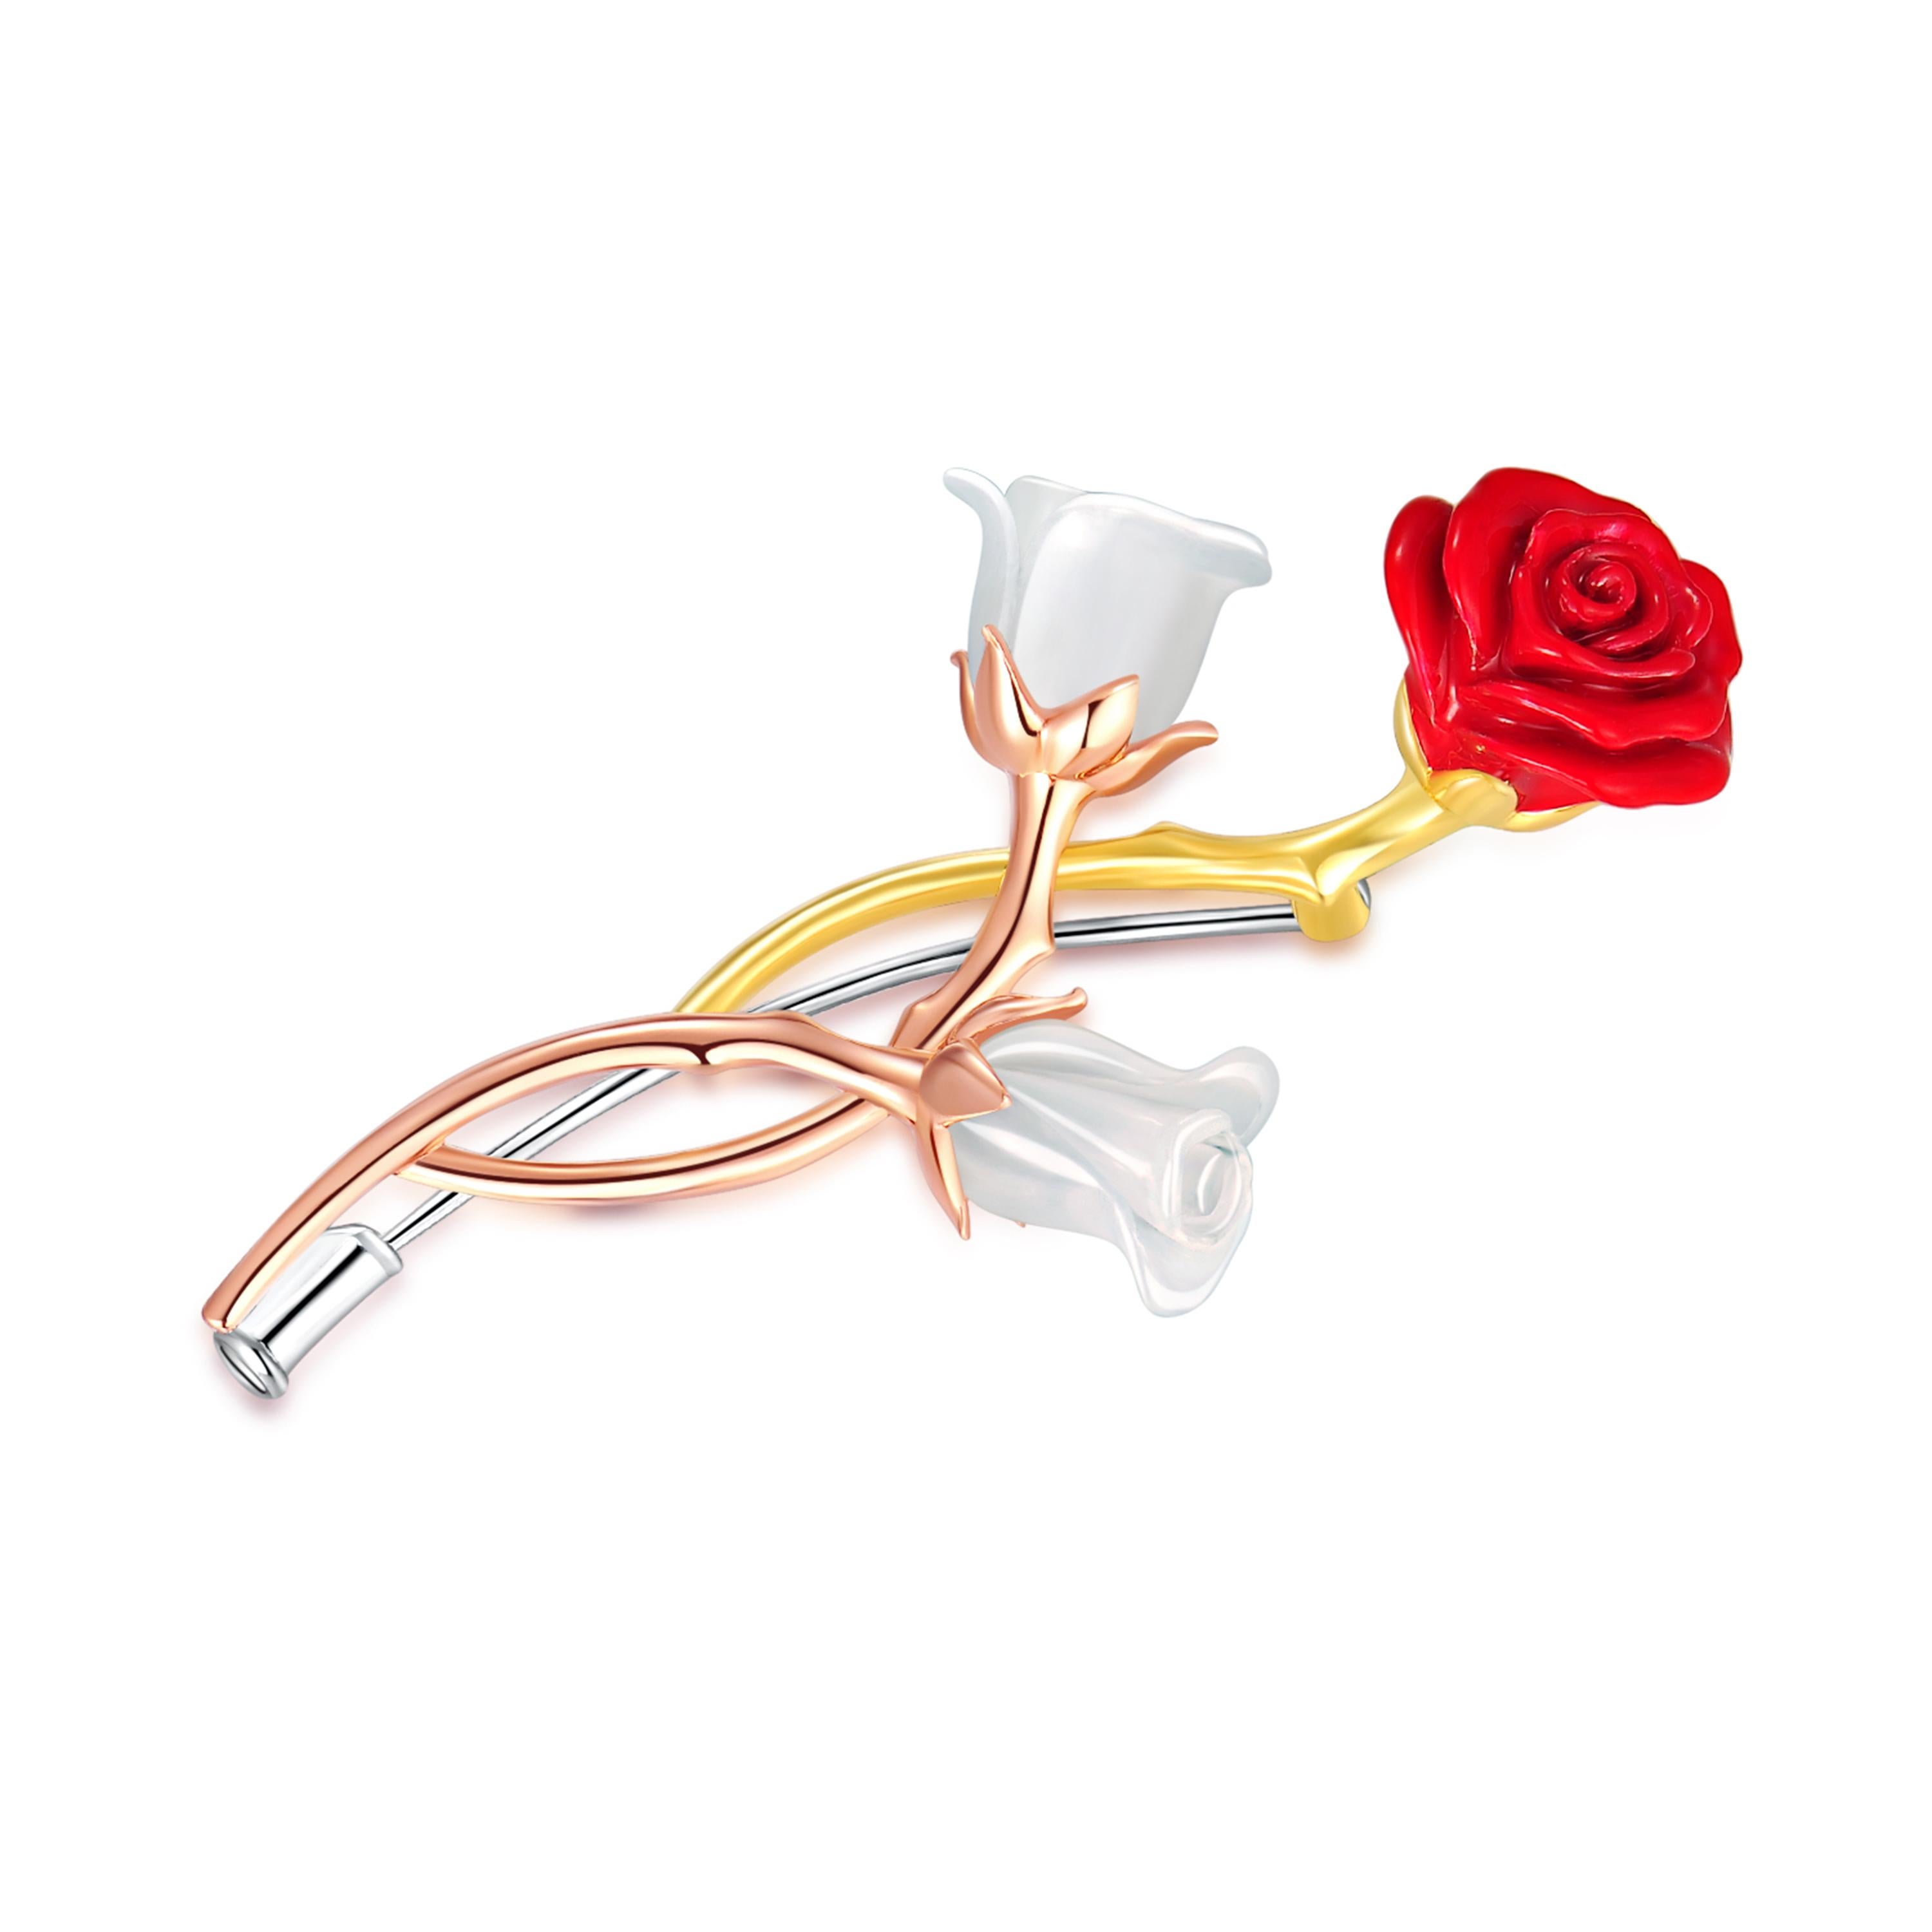 Description:
Blossom with the sweet winter roses wearing the three colour 18ct gold Rose bunches brooch set with two hand cut white nephrite roses and a luscious red enamel rose.

A little bit more about nephrite:
Nephrite is a form of jade which is